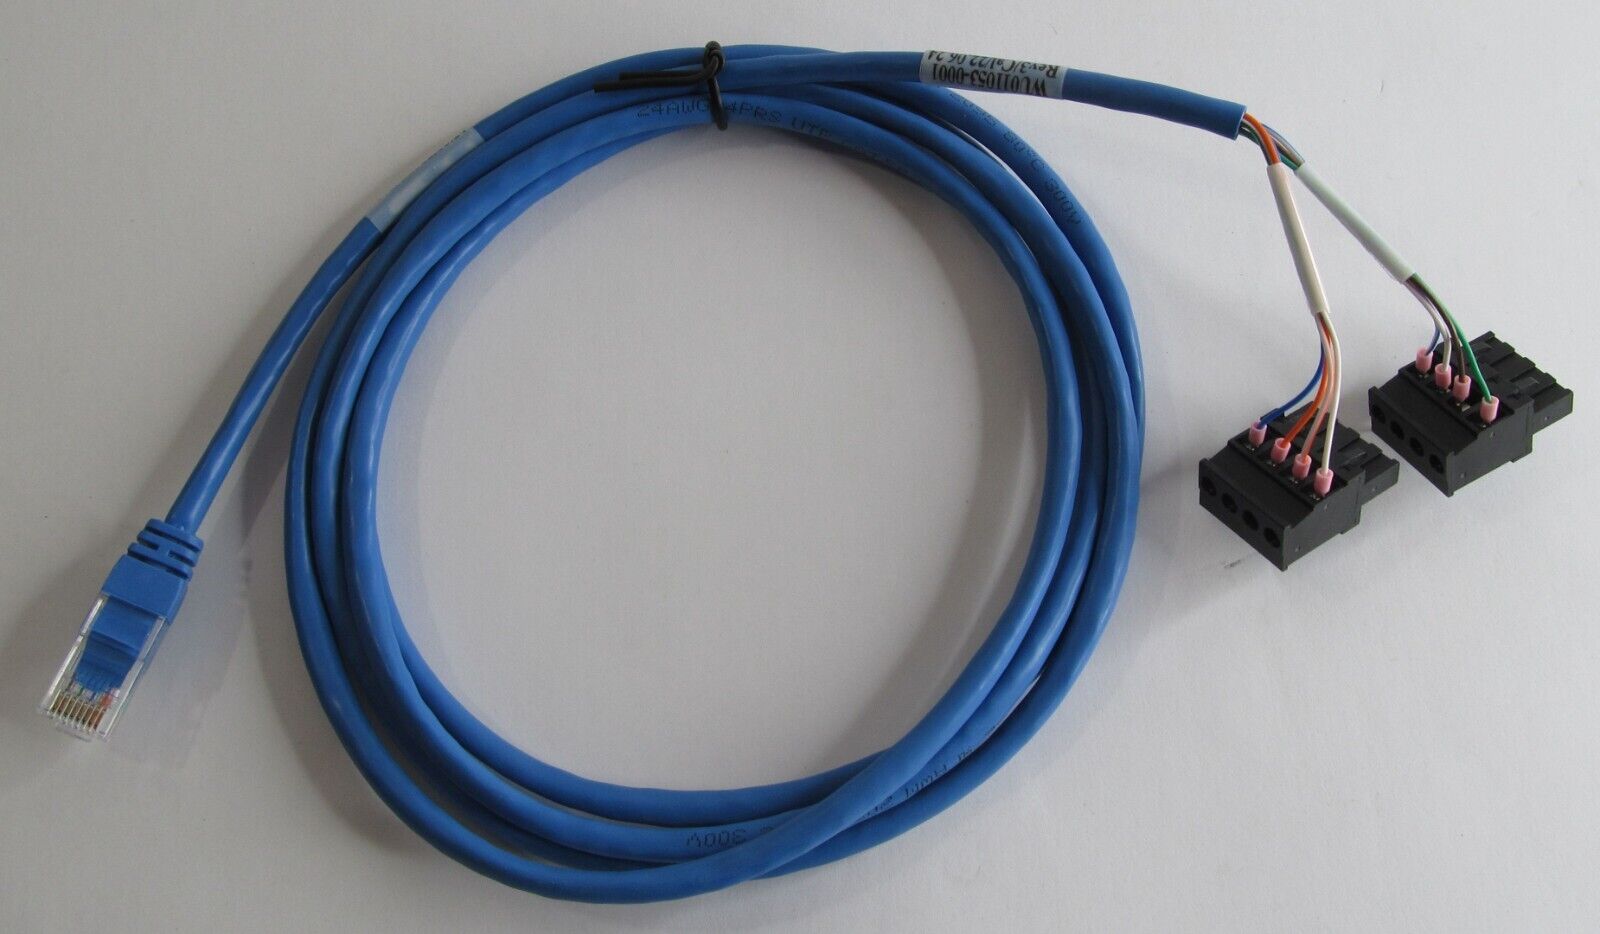 NEW DRESSER WAYNE FUELING SYSTEMS WU011053-0001 FUSION DATA SAFETY BOX CABLE